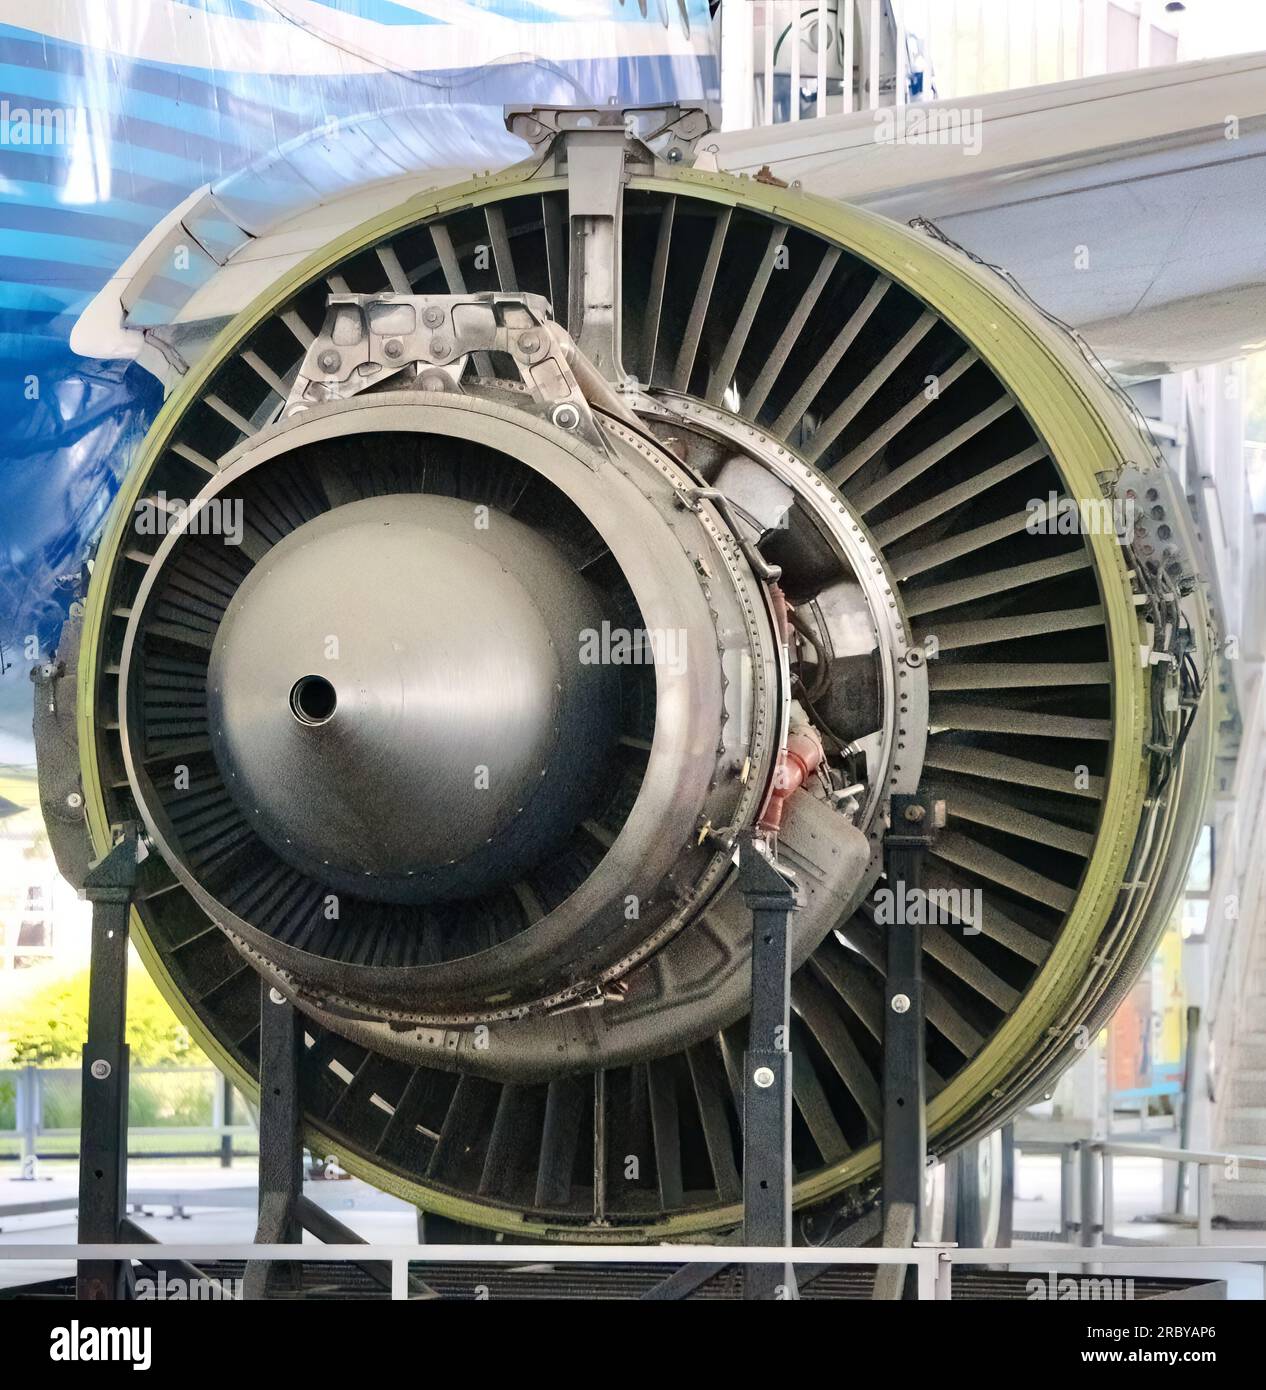 General Electric GE90 high-bypass turbofan aircraft engine on display at The Museum of Flight Seattle Washington State USA Stock Photo